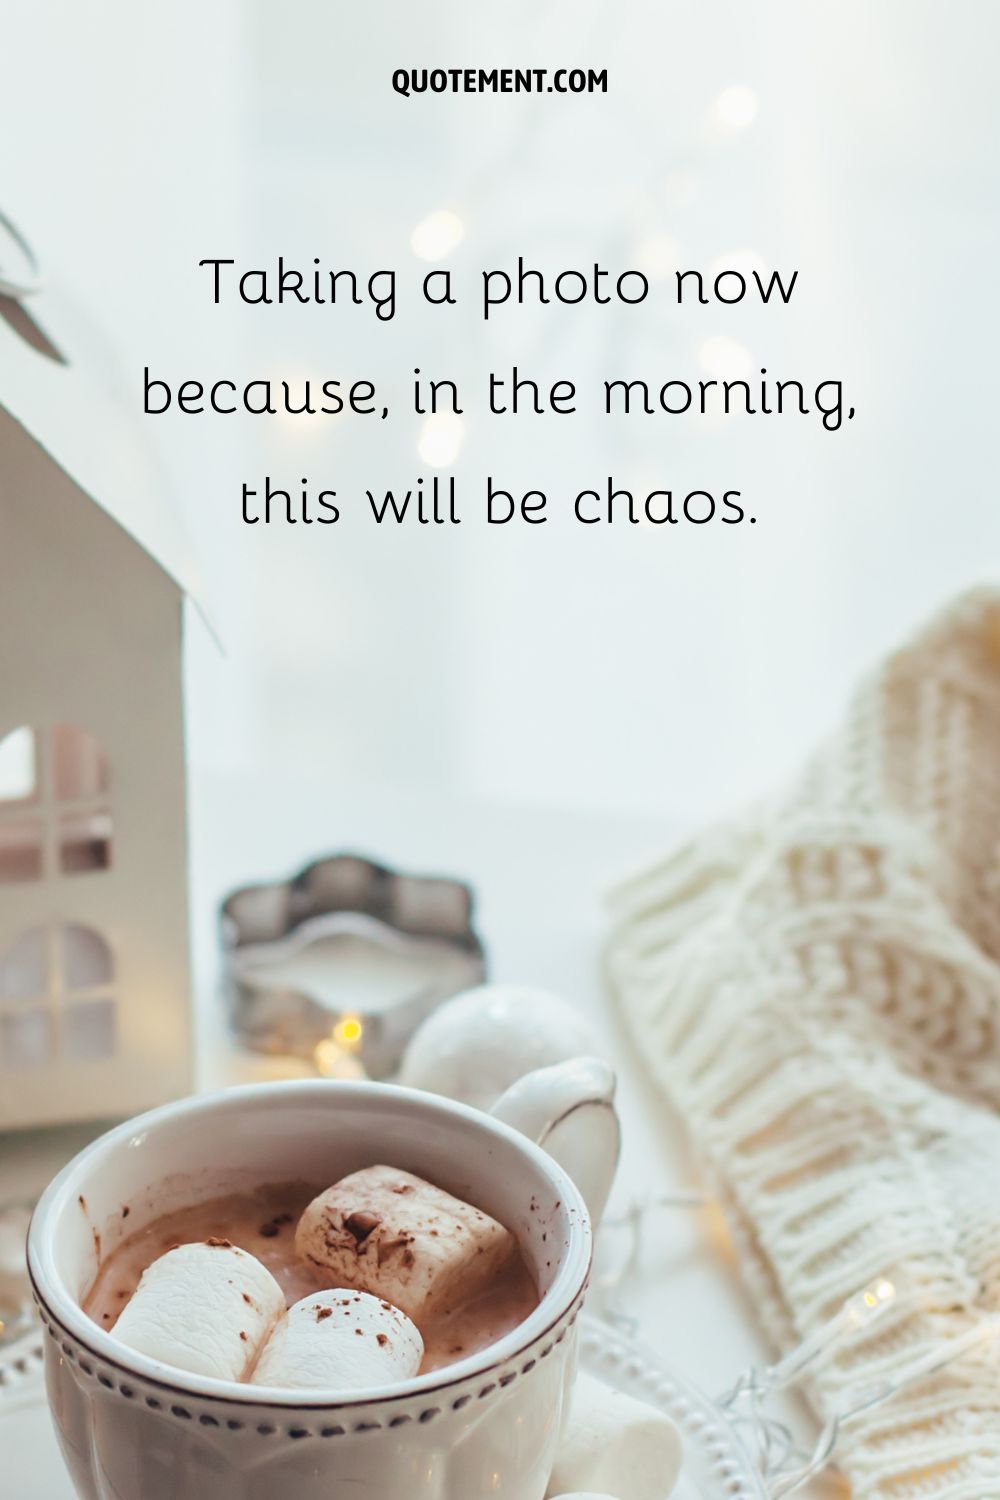 A cup of hot chocolate with marshmallows and warm knitwear in the background